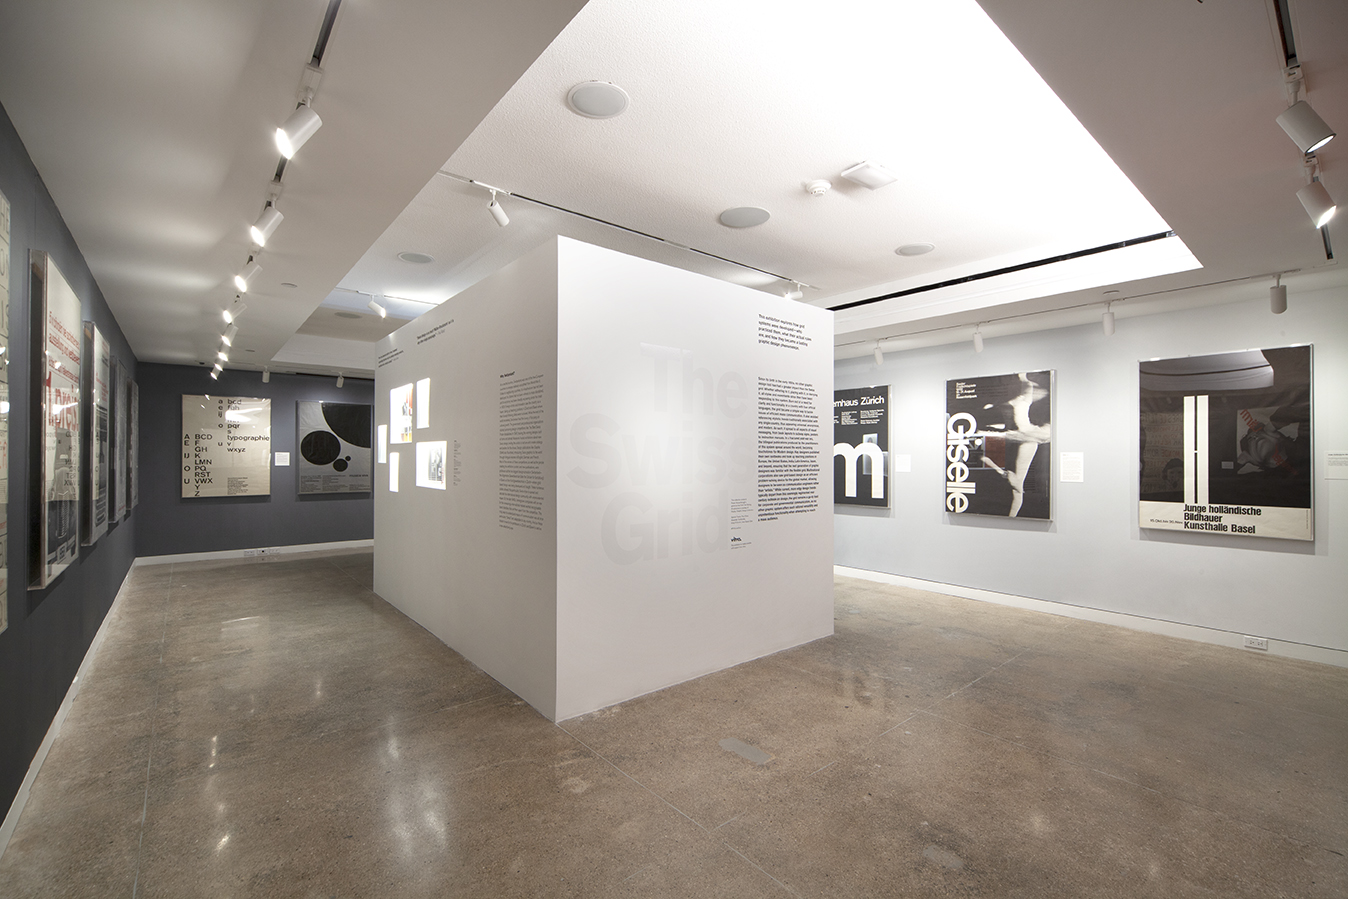 A photograph of the Swiss Grid gallery space with white and grey walls.